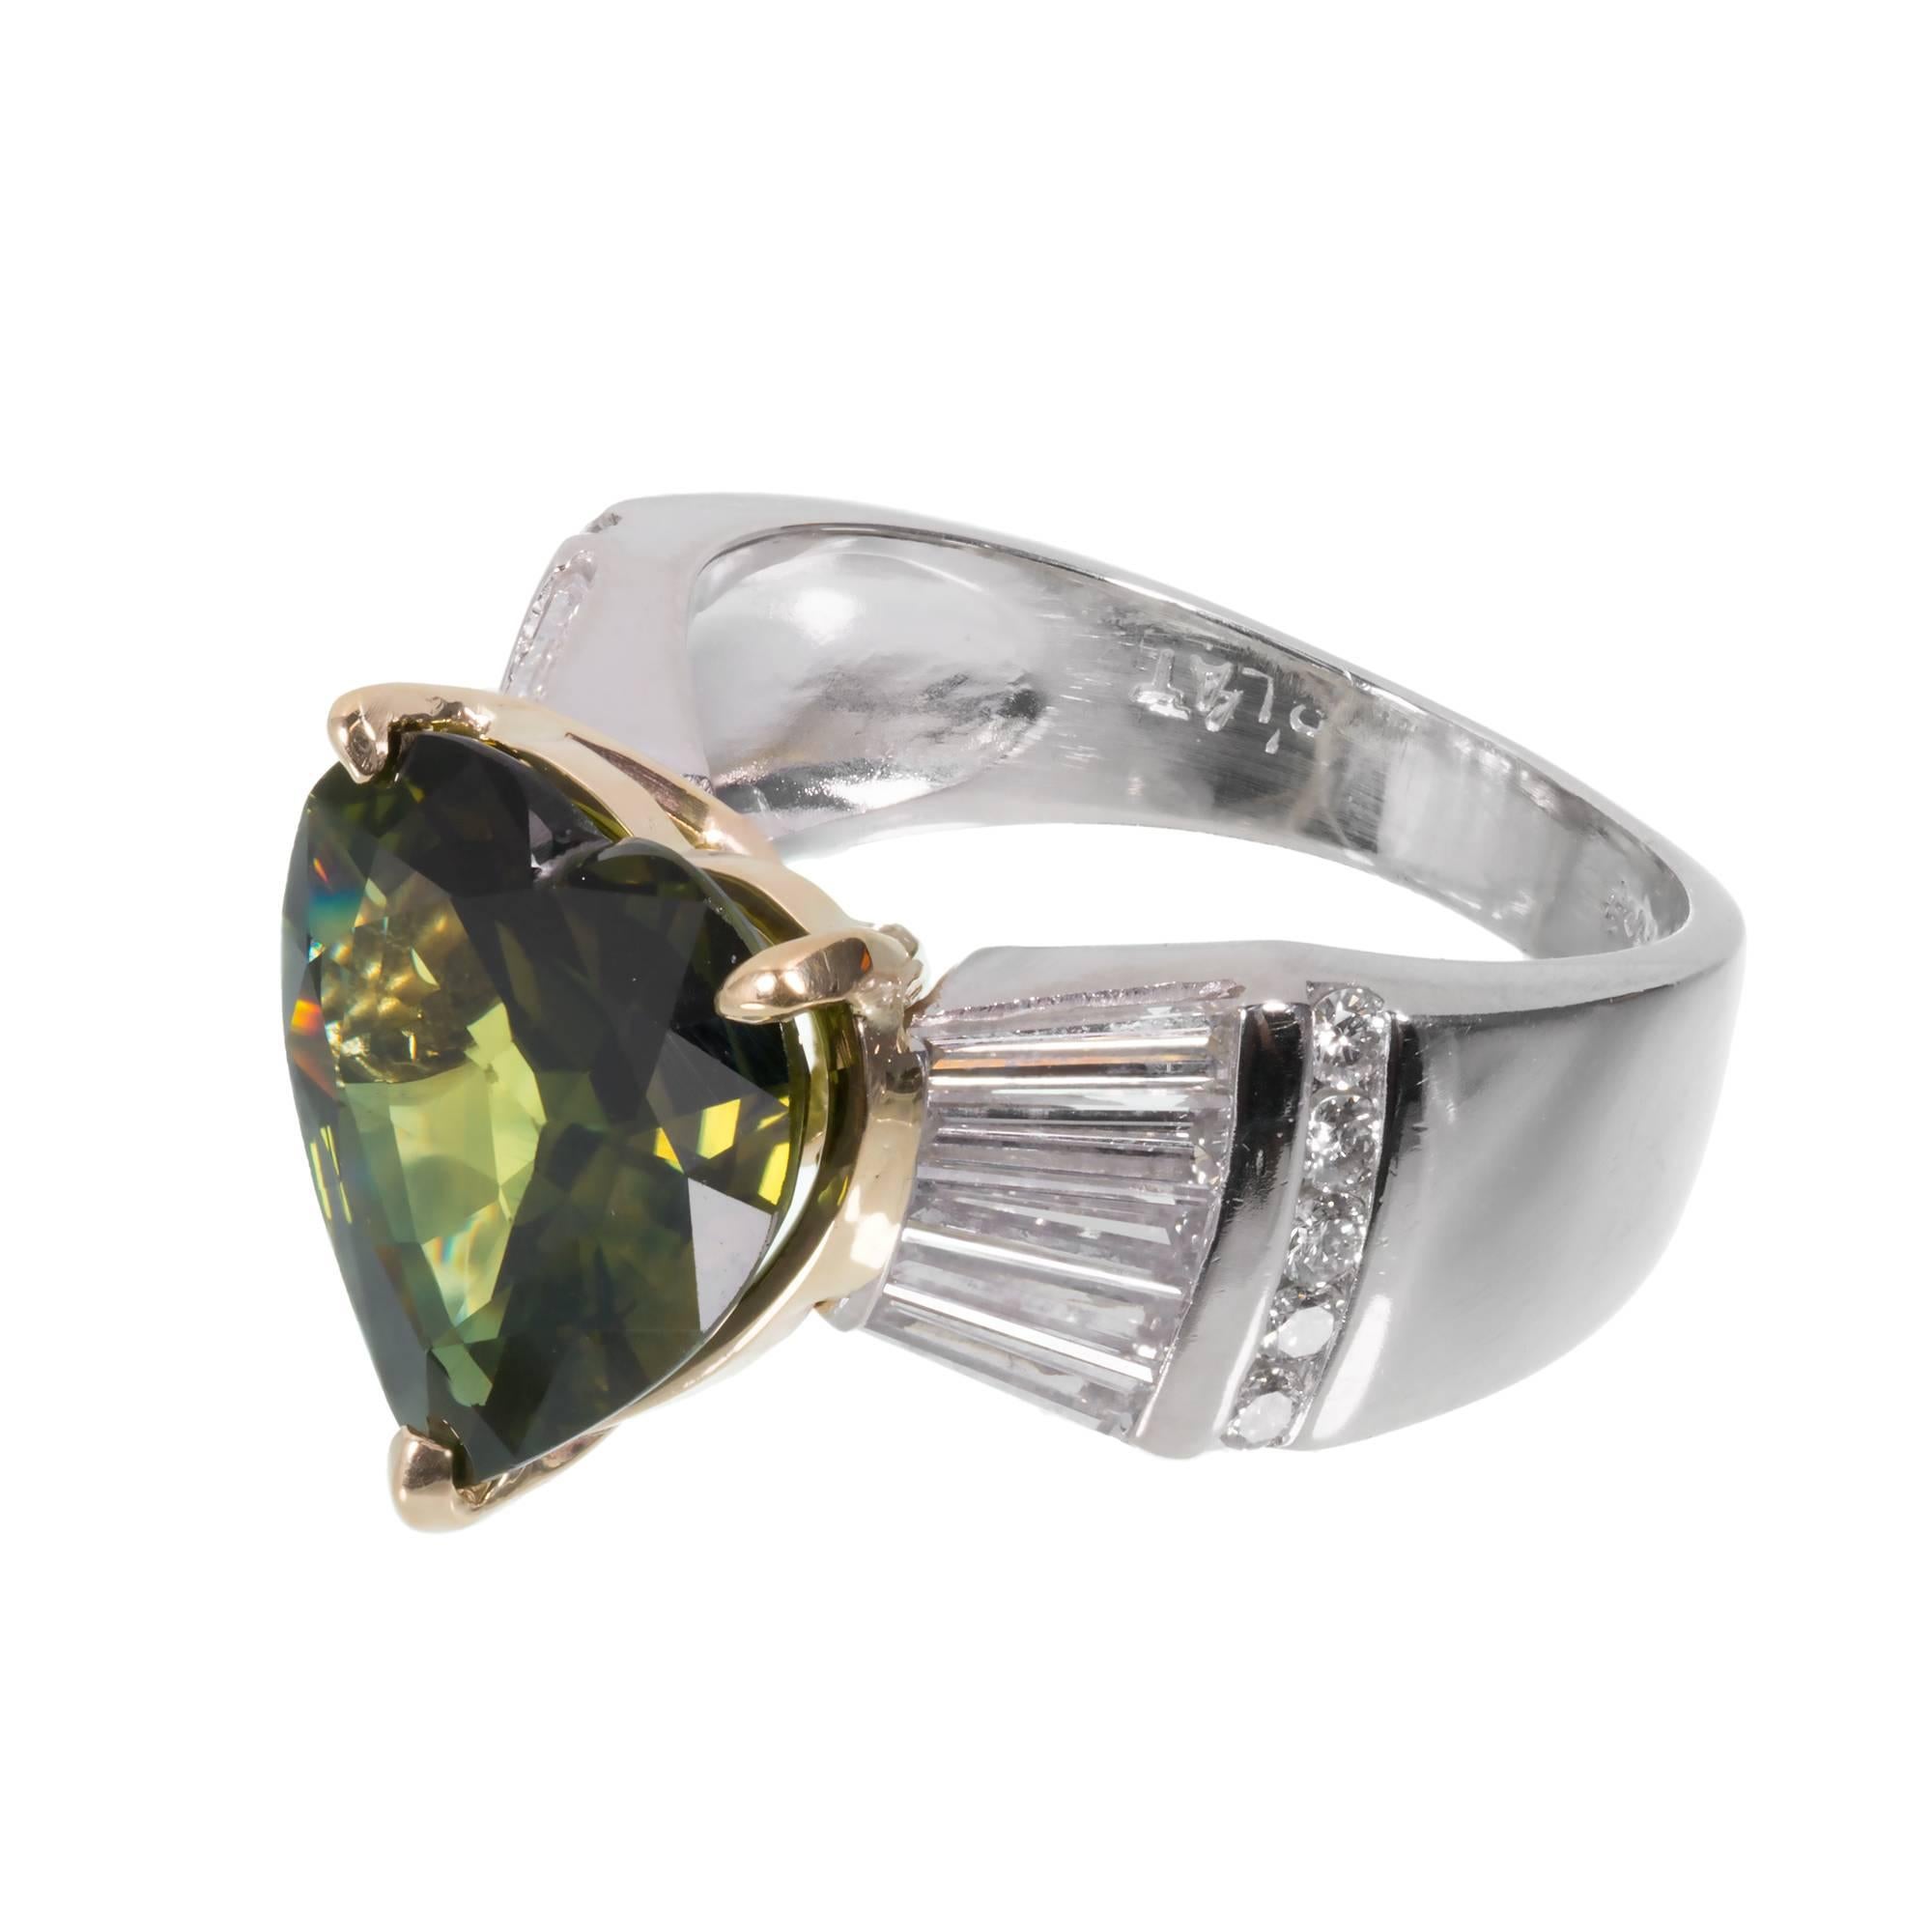 Green sapphire and diamond engagement ring. GIA certified heart shaped green sapphire center stone with 20 round and tapered baguette accent diamonds in Platinum and 18k yellow gold setting. Certified natural conundrum by the GIA as simple heat